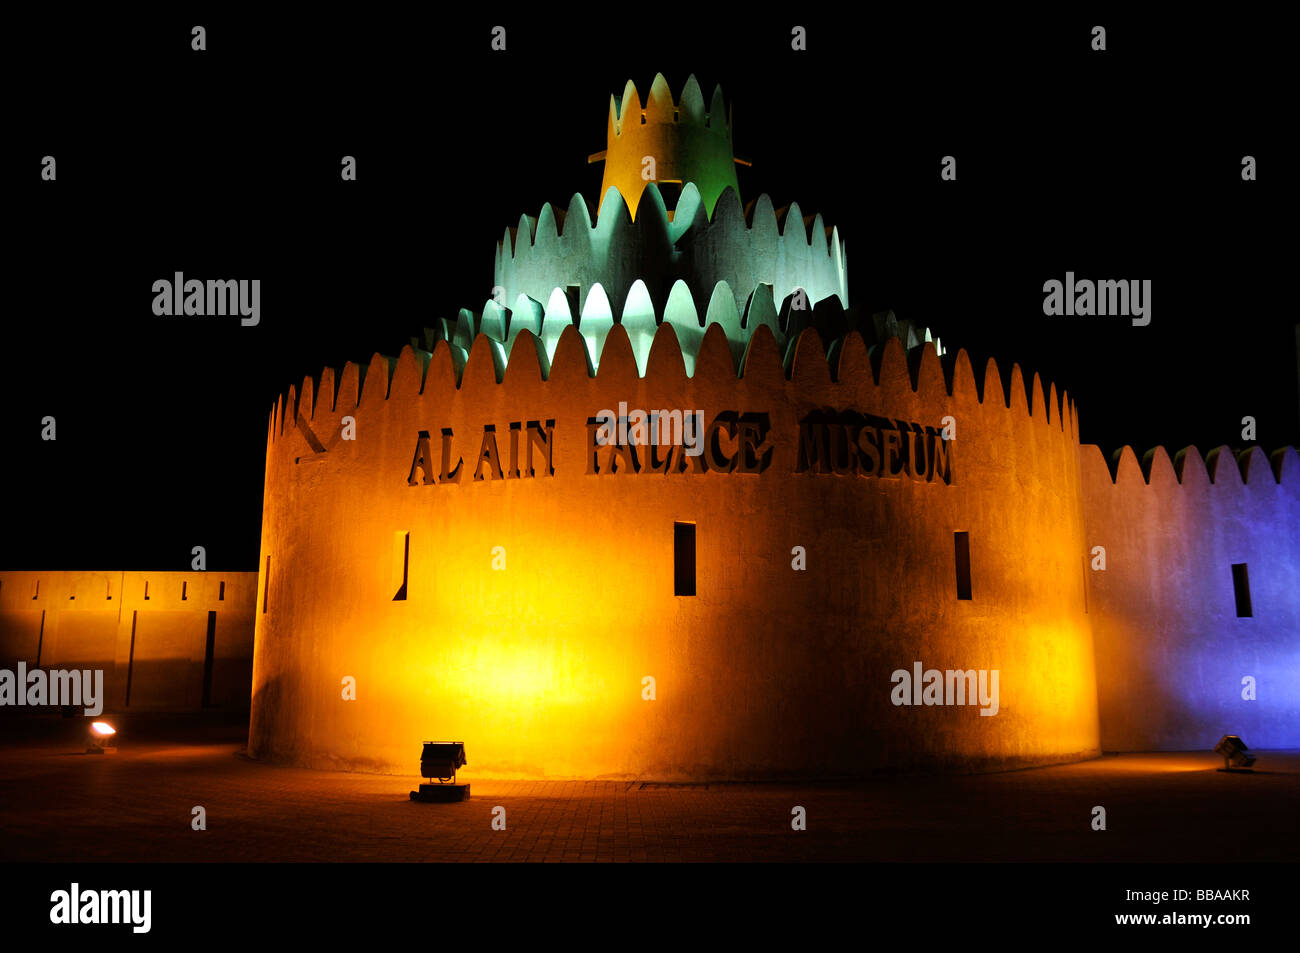 Tower of the Al Ain Palace Museum at night, Palace Museum, Al Ain, Abu Dhabi, United Arab Emirates, Arabia, the Orient, Middle  Stock Photo